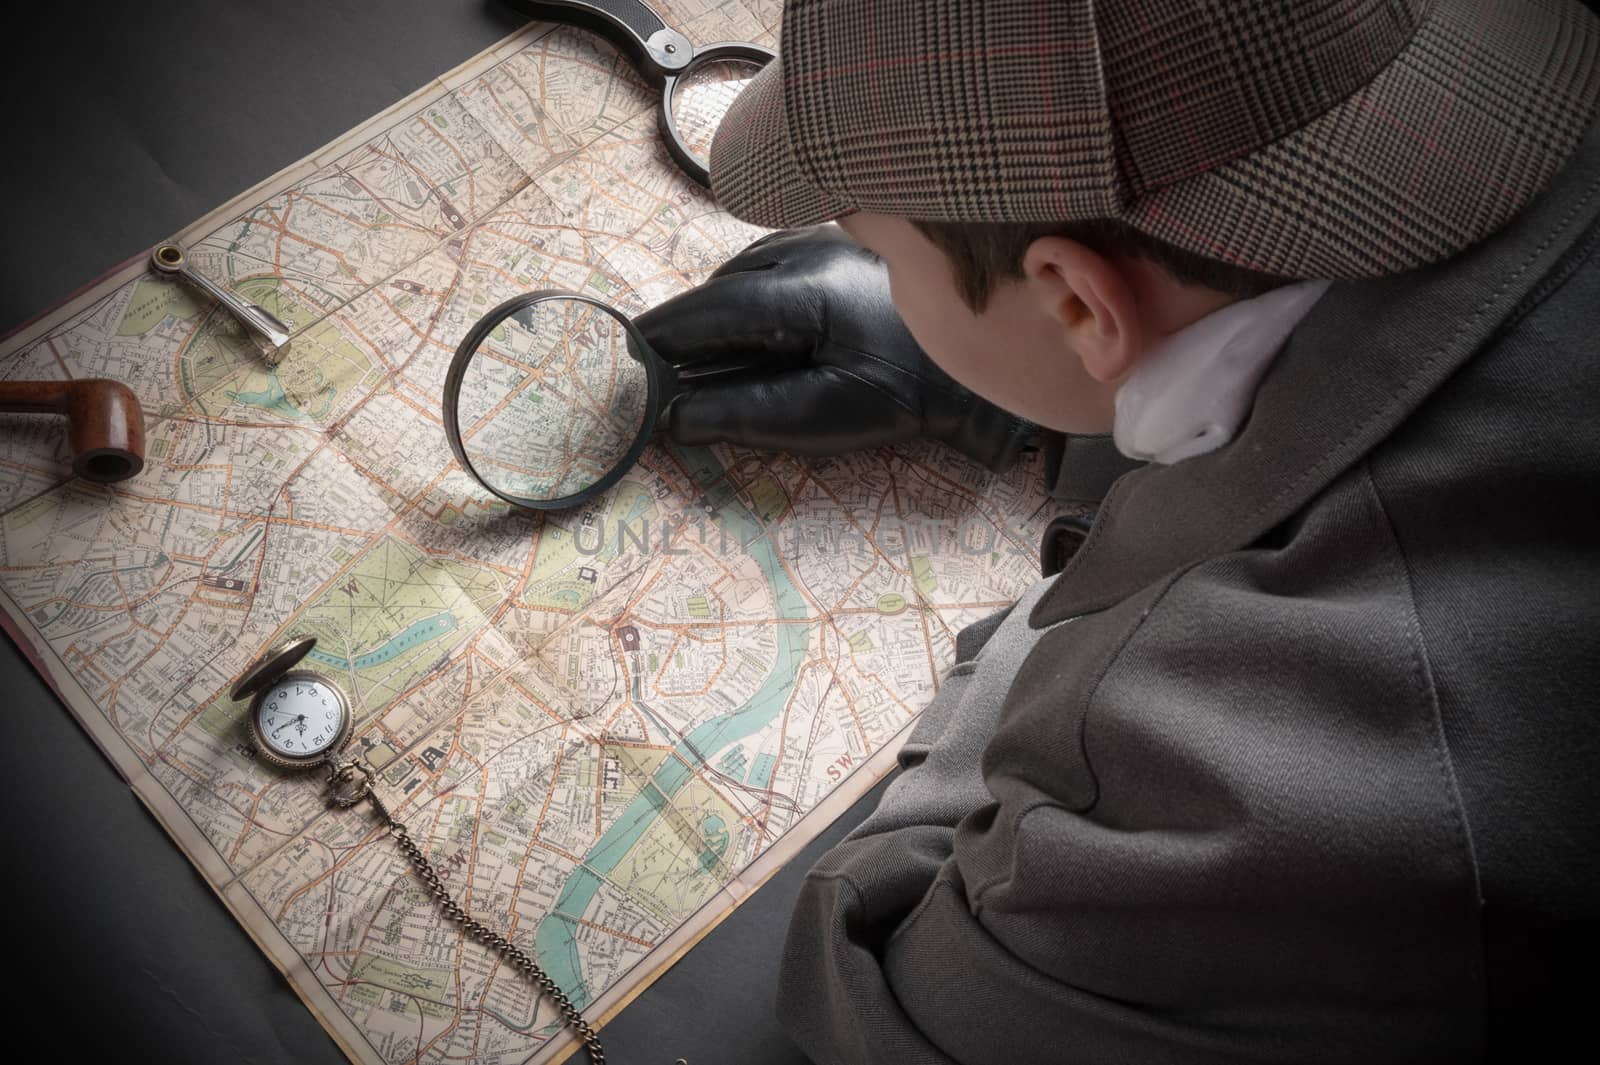 Detective man- magnifying glass, map of London, clock on chain